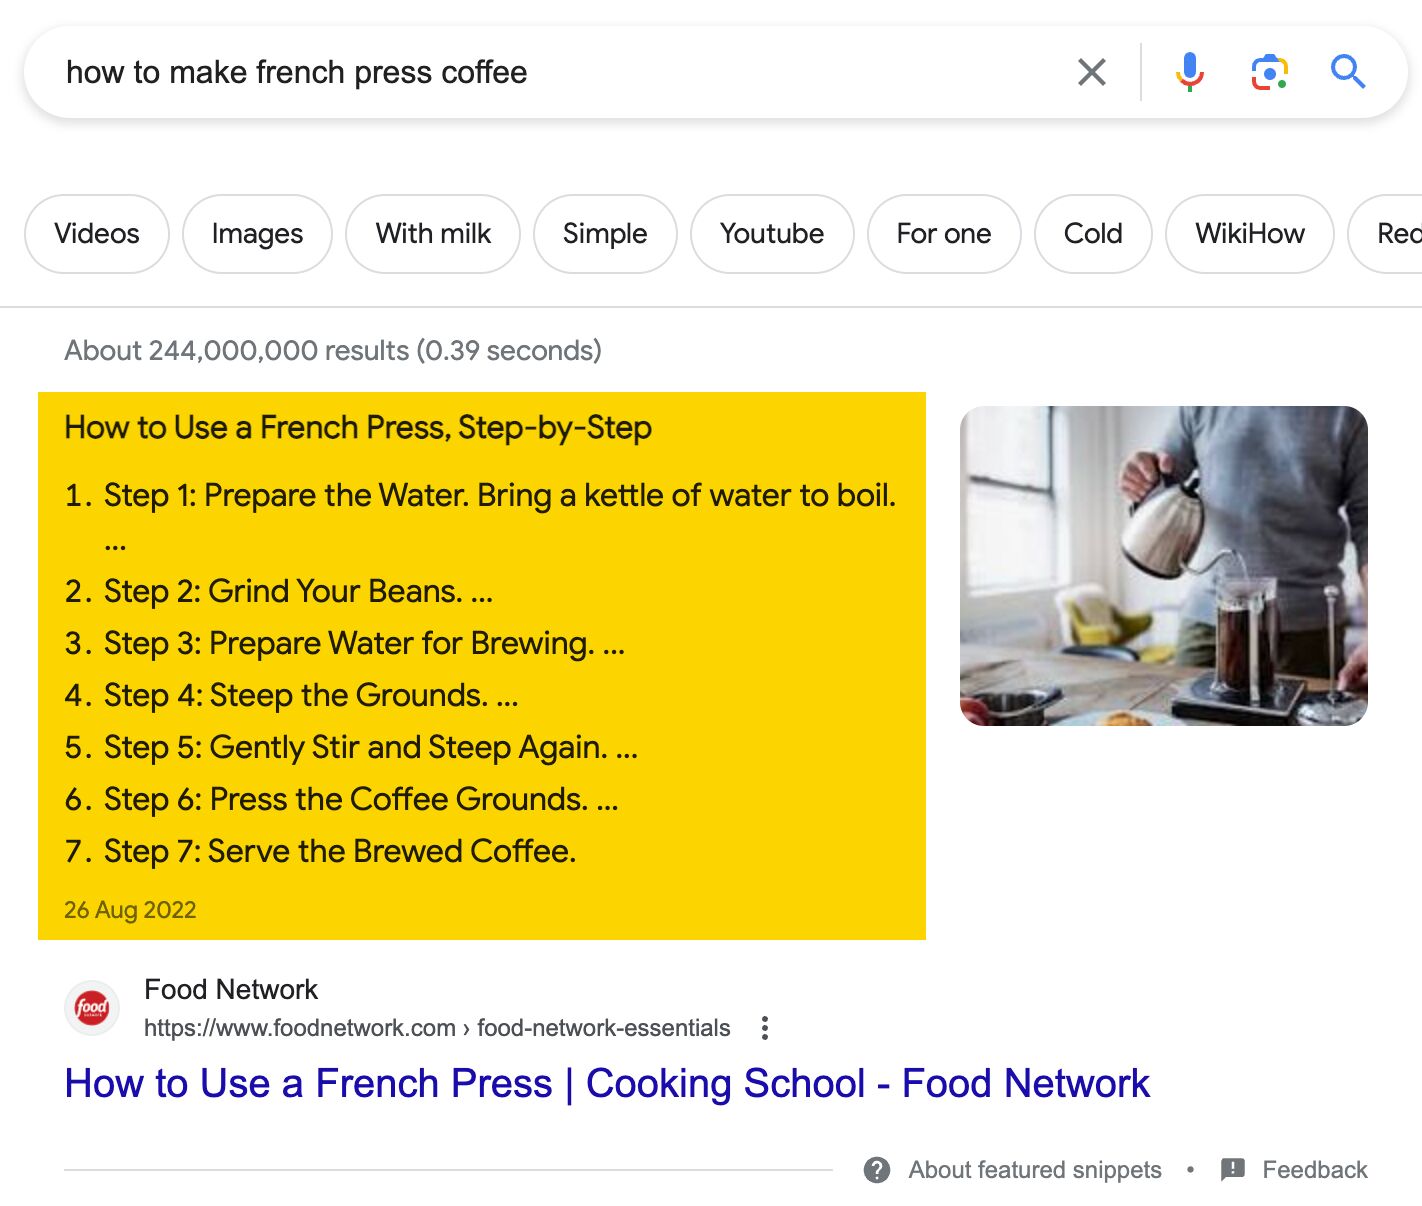 The featured snippet for "how to make french press coffee" shows searchers want the guide to be step-by-step